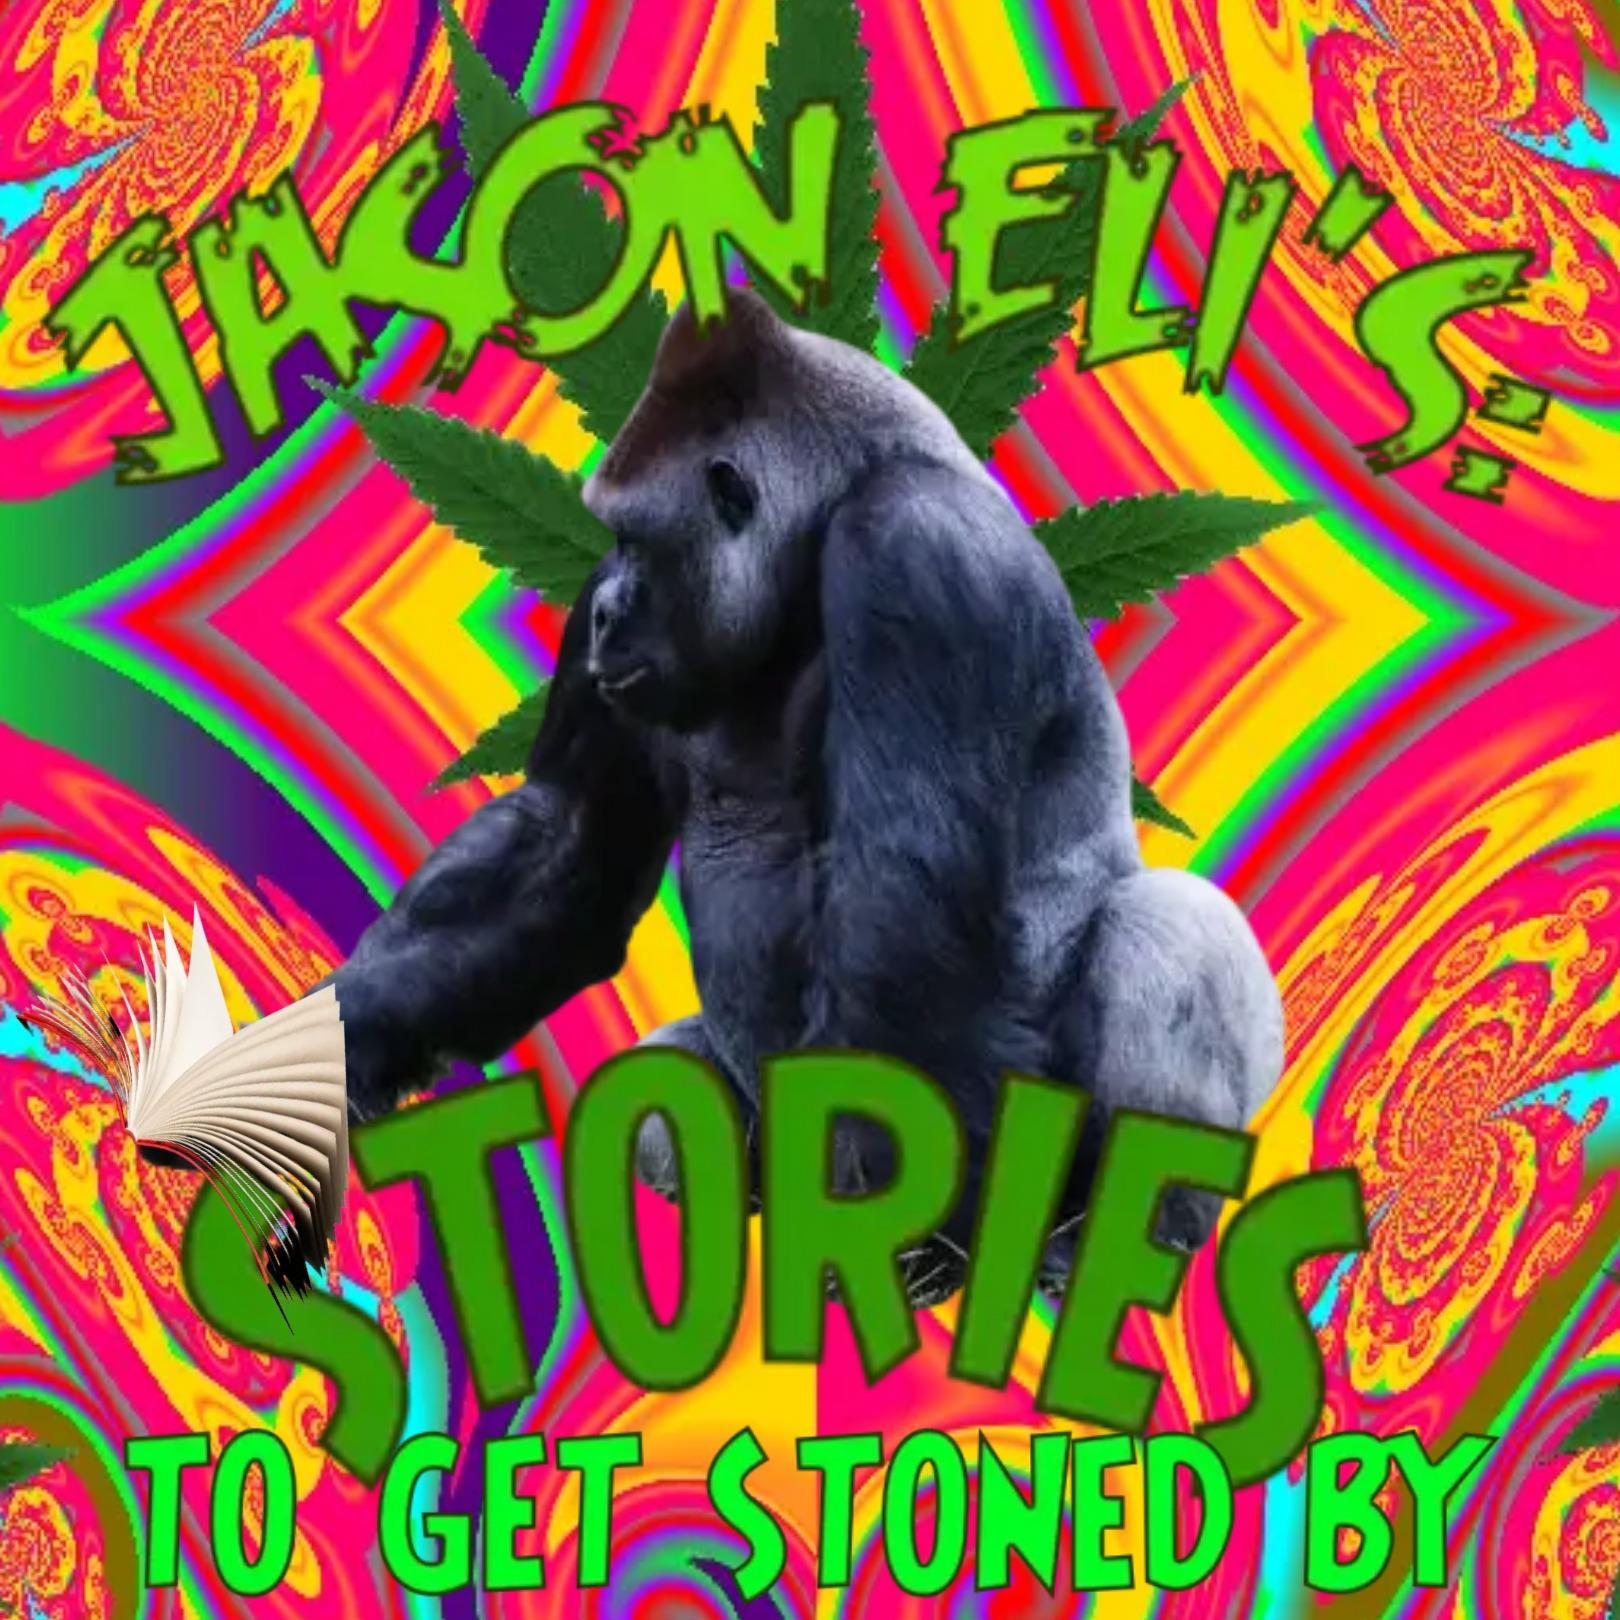 Jason Eli's:  "Stories To Get Stoned By"